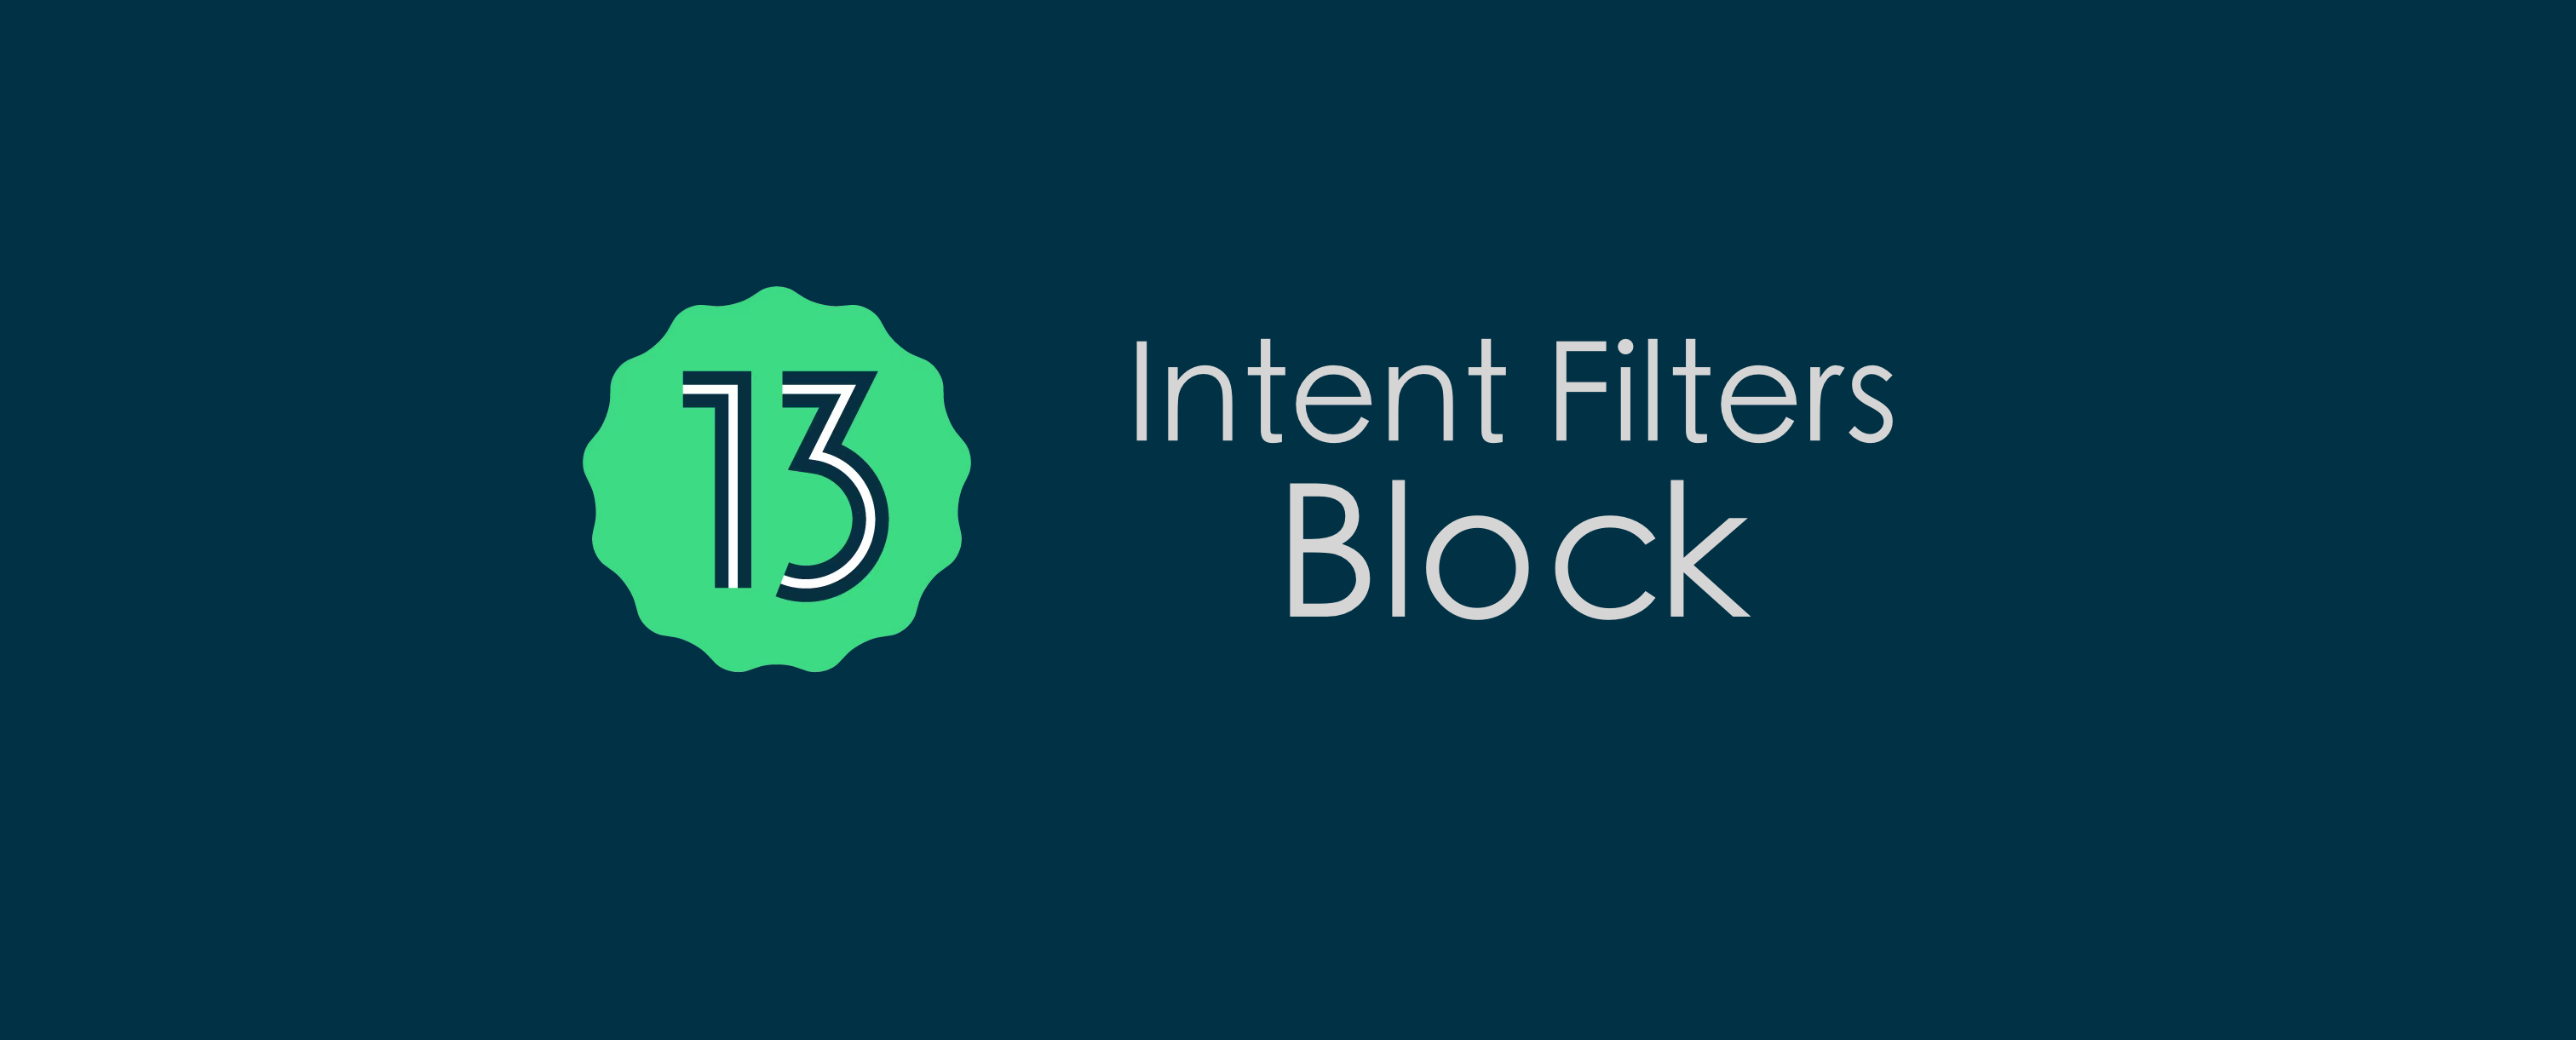 Intents and intent filters